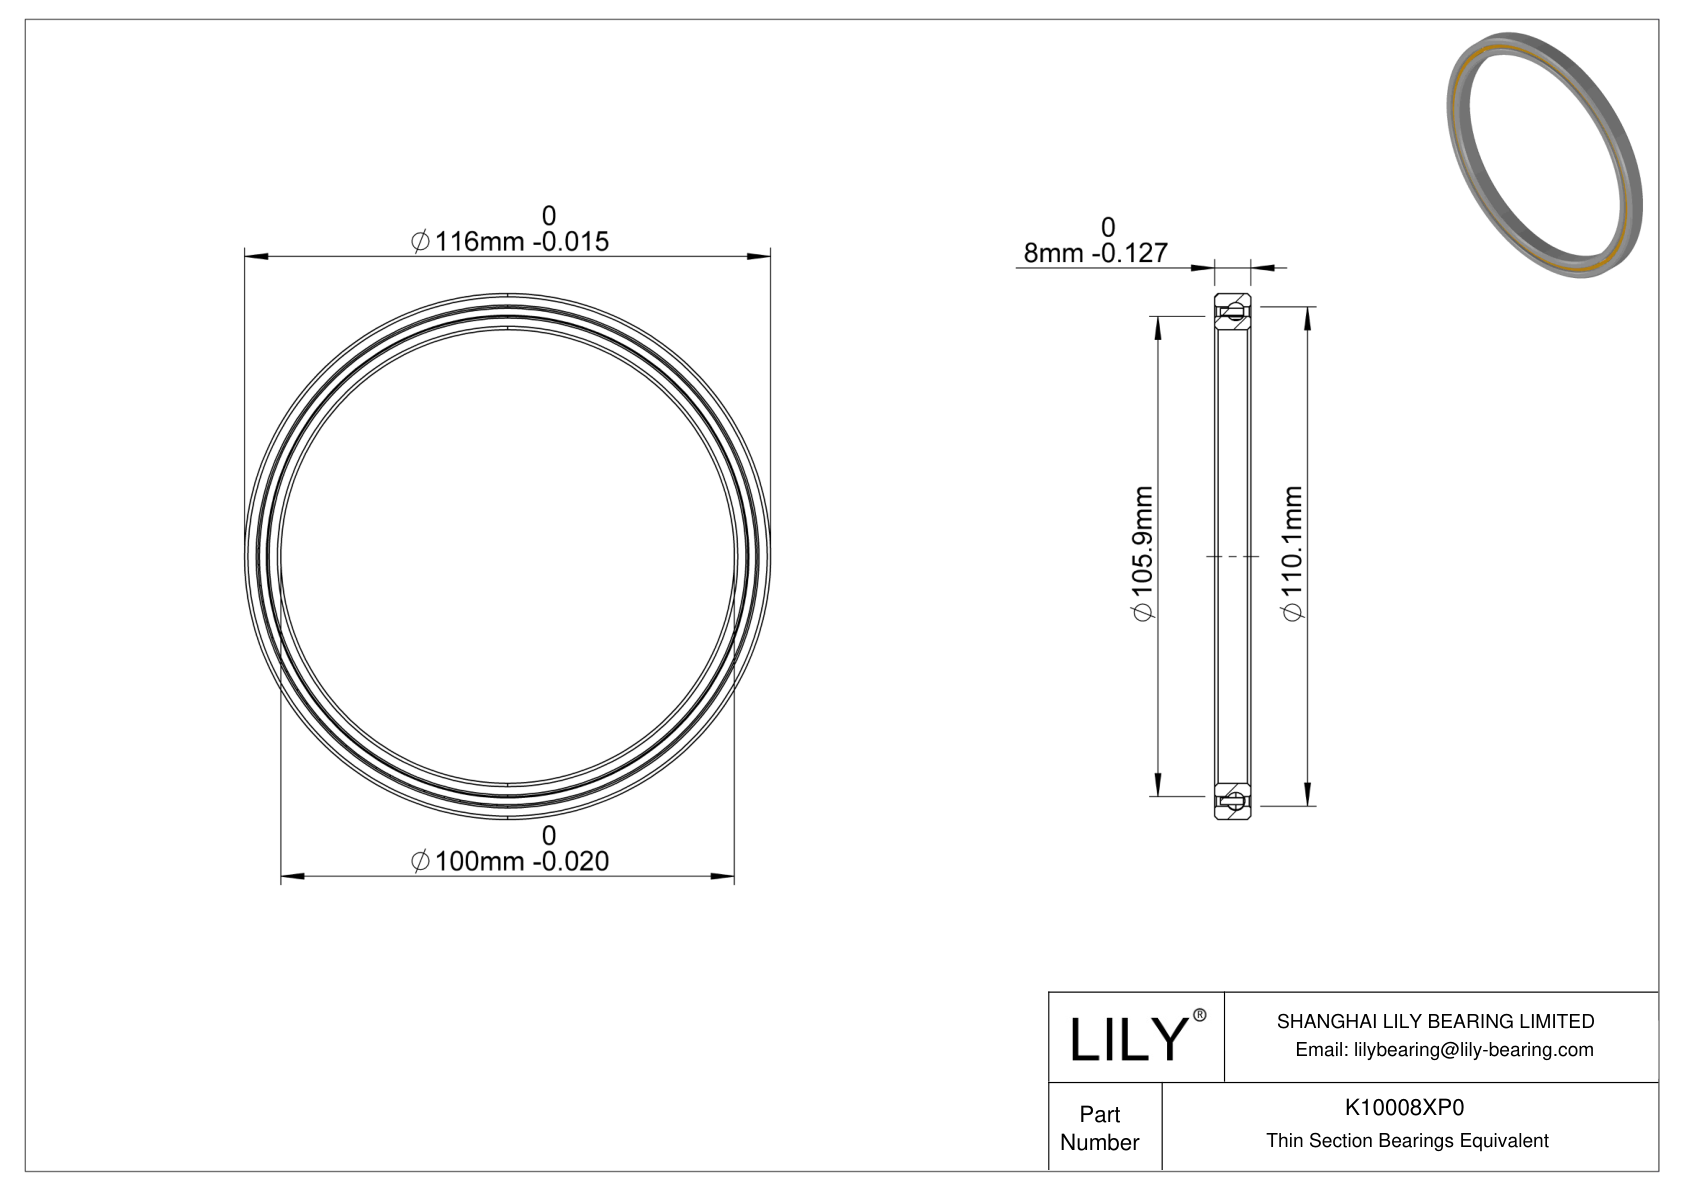 K10008XP0 Constant Section (CS) Bearings cad drawing